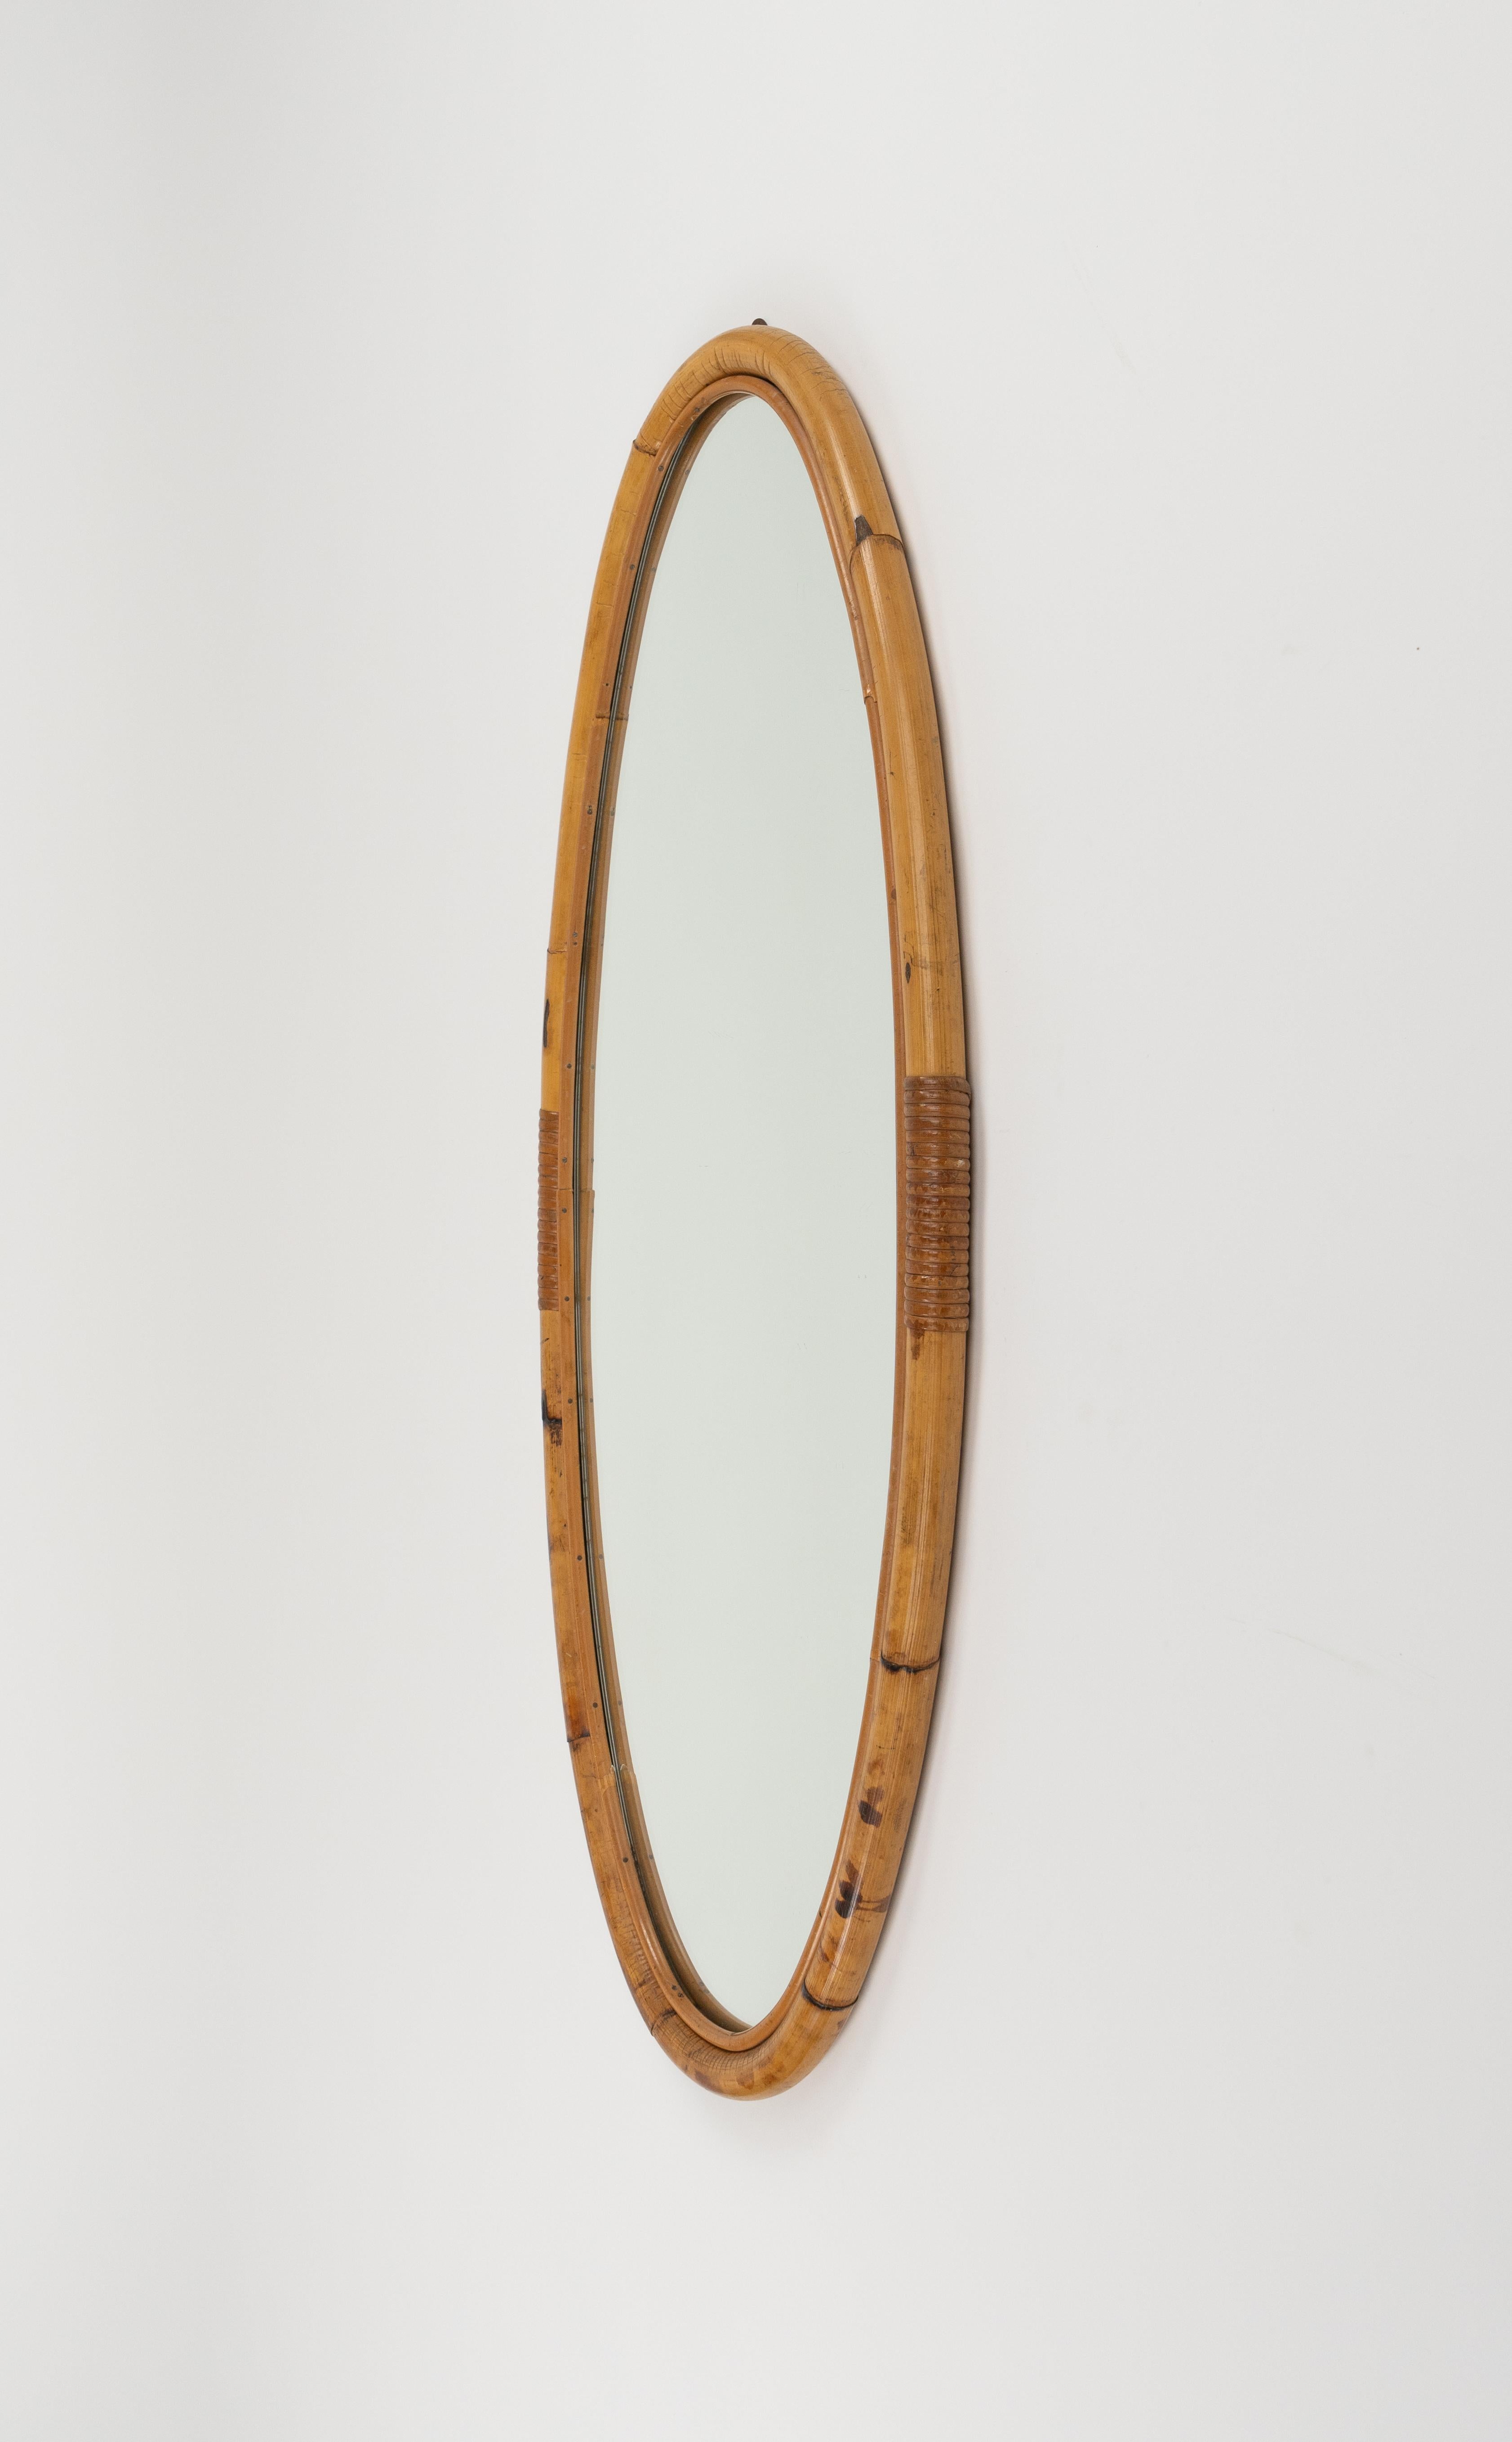 Midcentury Bamboo and Rattan Oval Wall Mirror, Italy 1970s For Sale 1